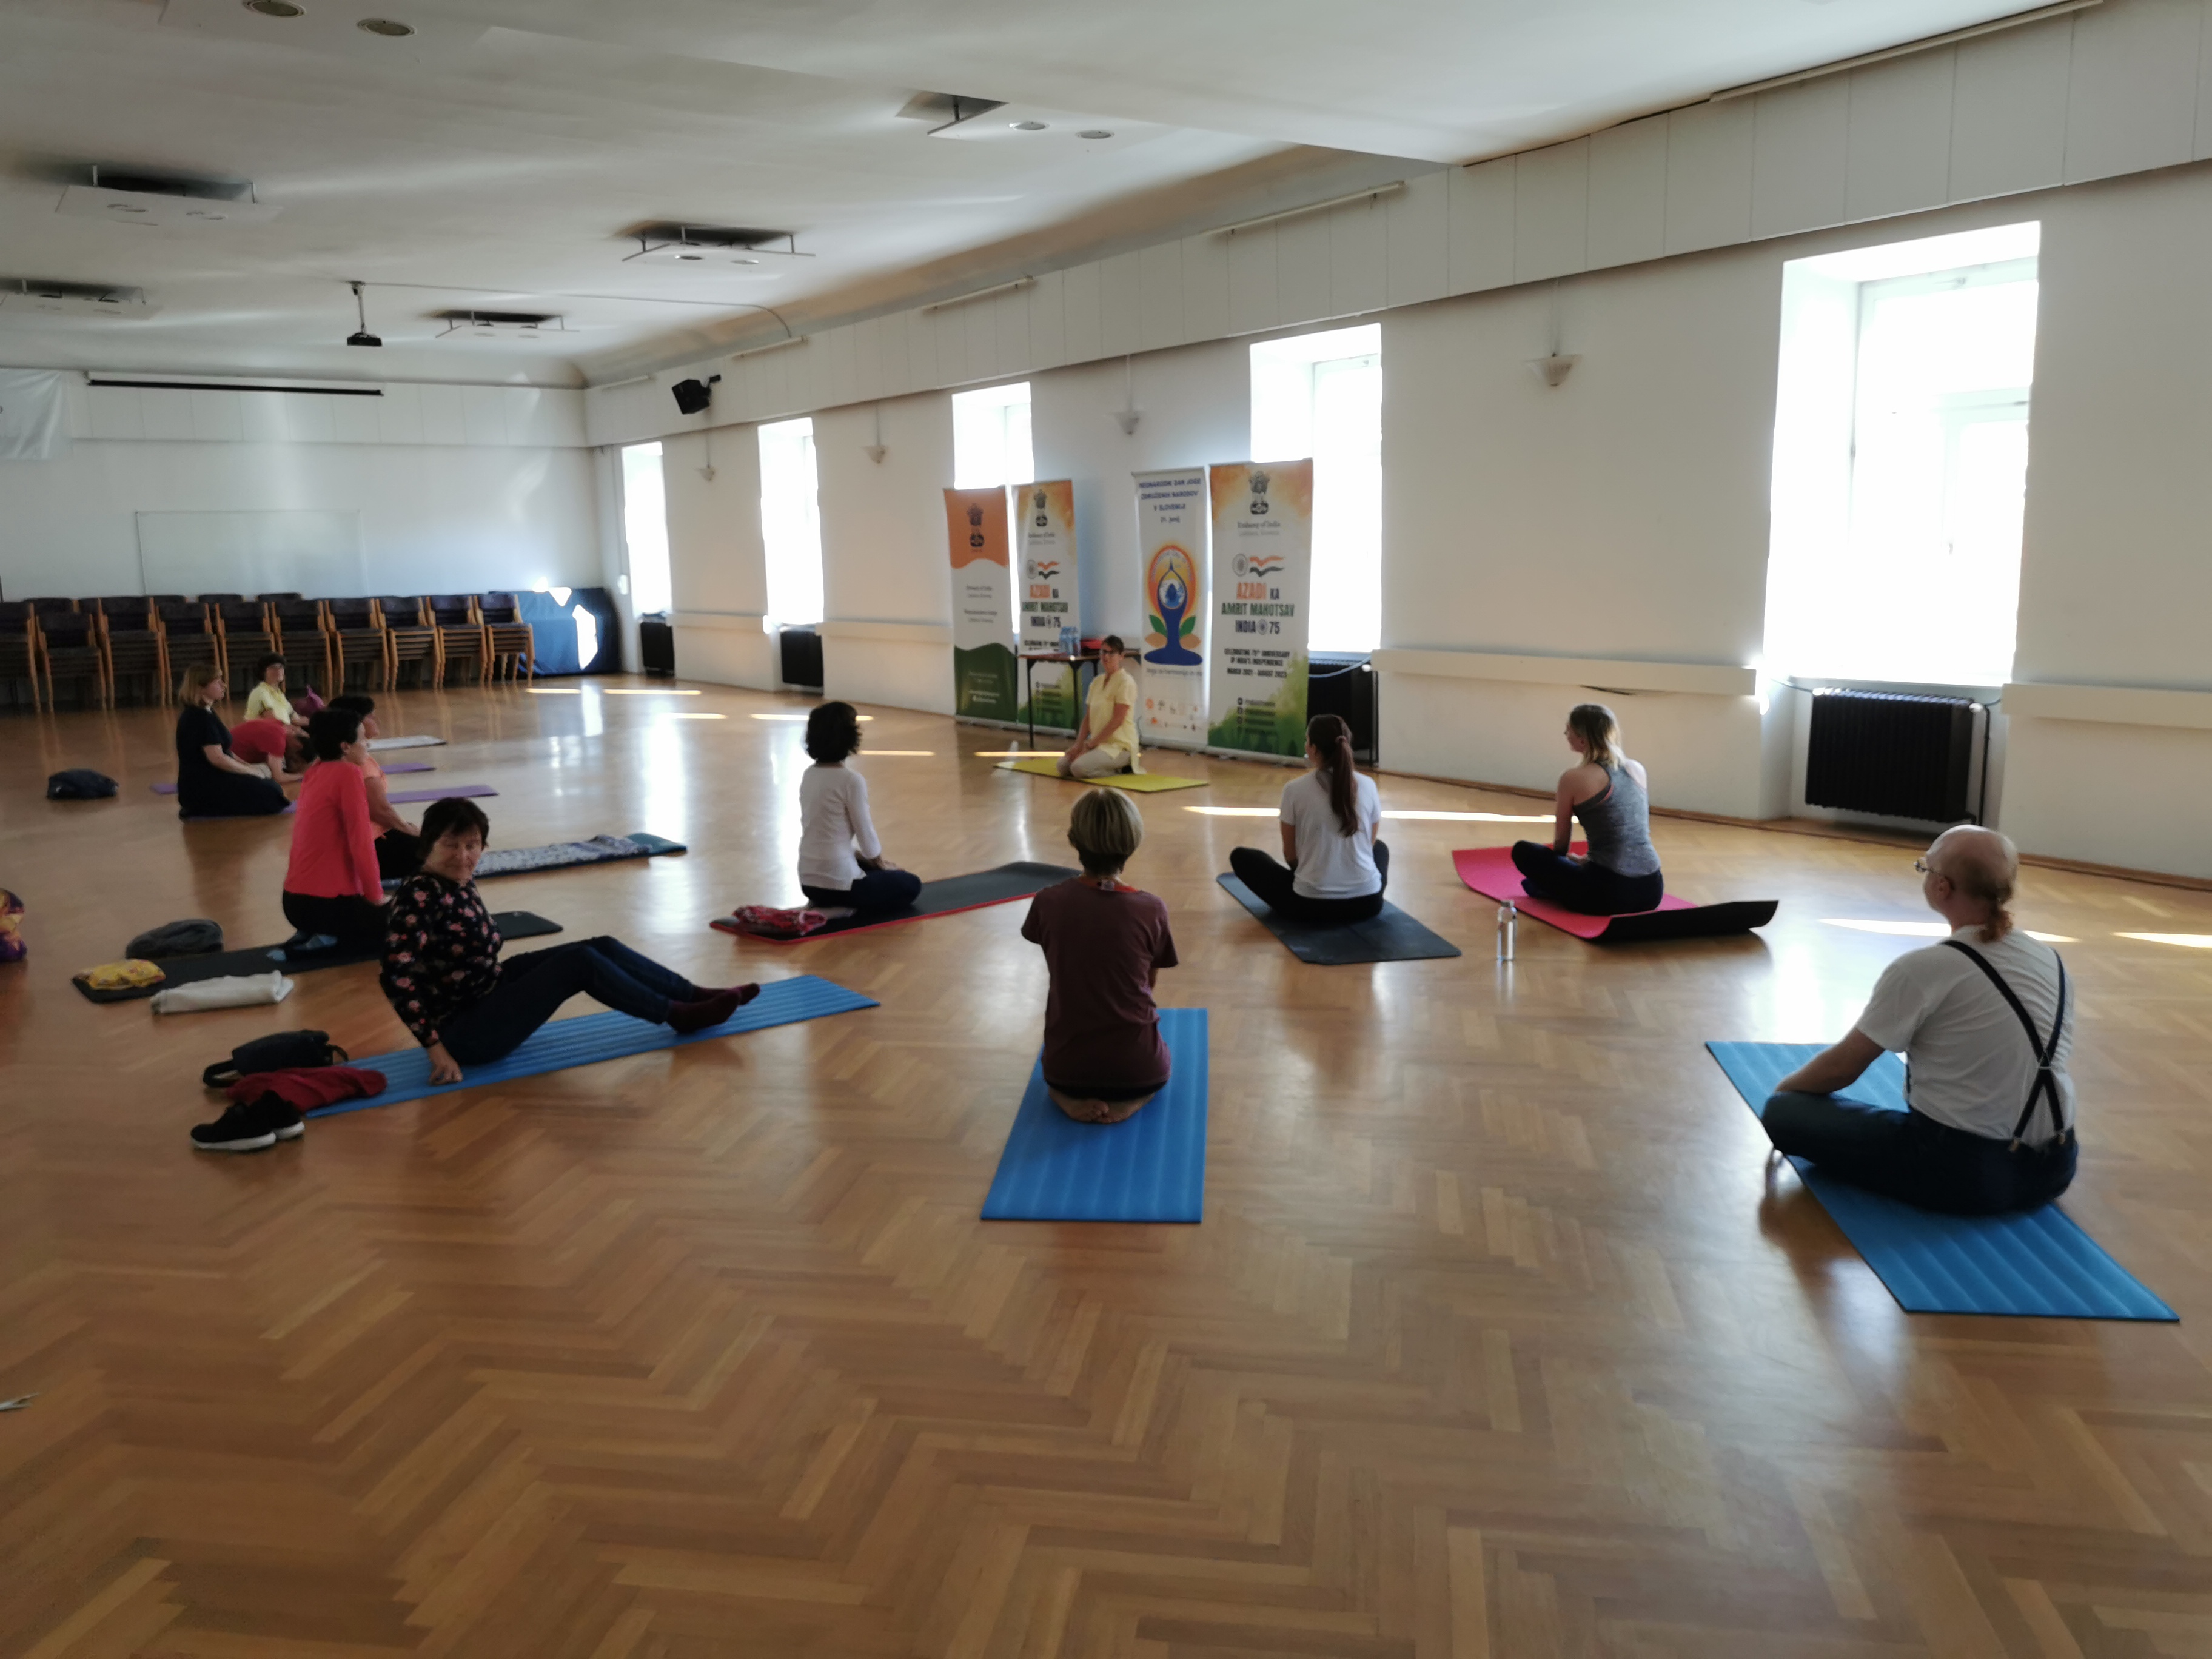 Ptuj Curtain Raiser event of the Surya Festival of Yoga and Wellness in Slovenia (2nd Edition) on 10 June 2022